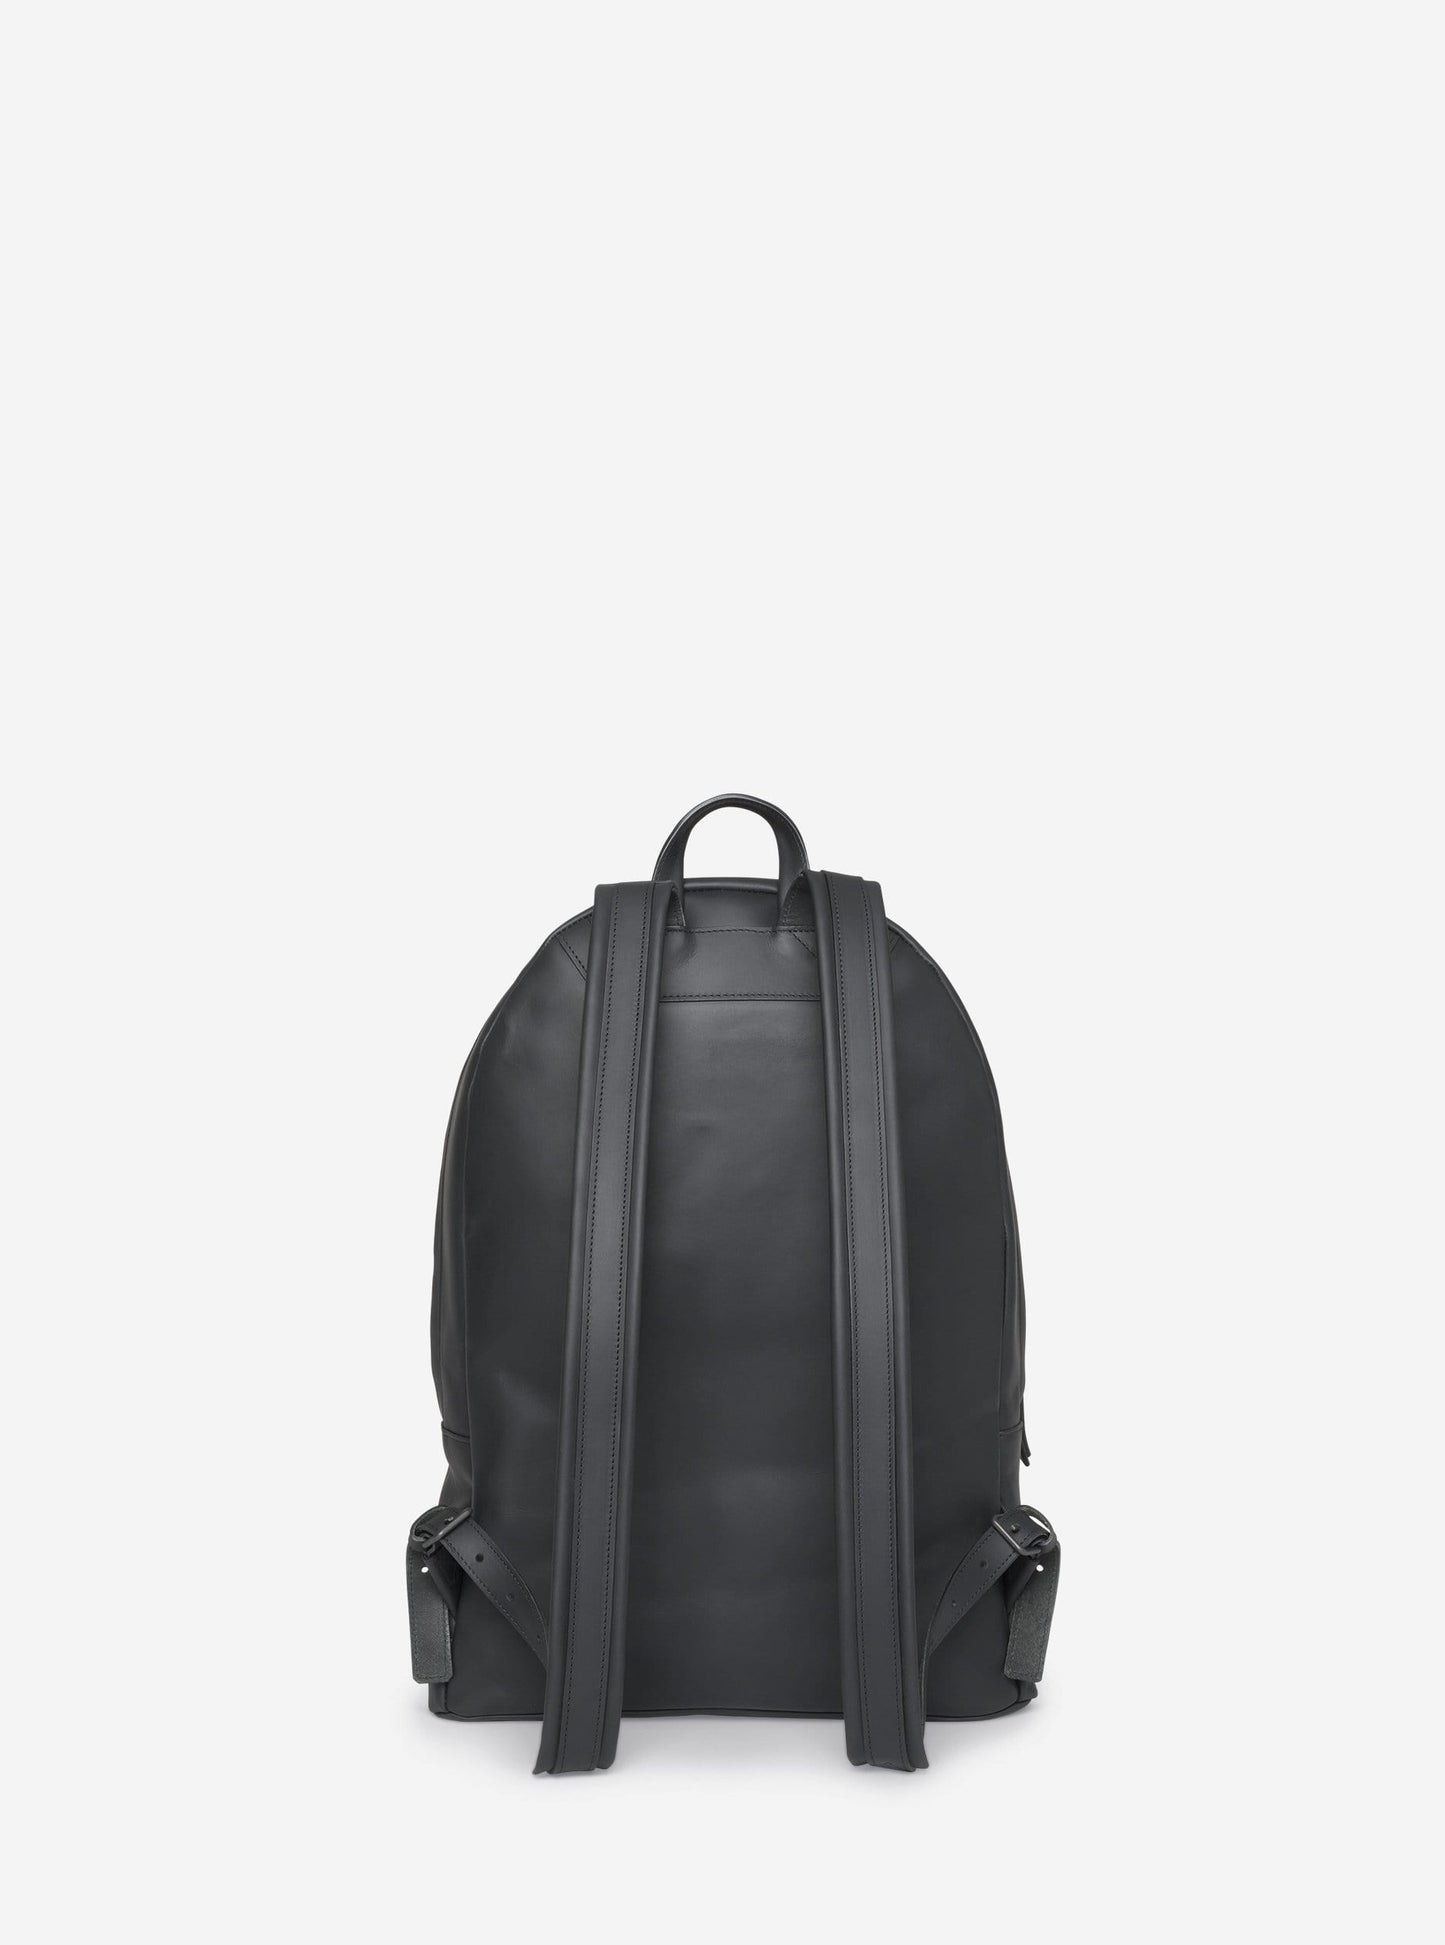 Leather backpack of PB 0110